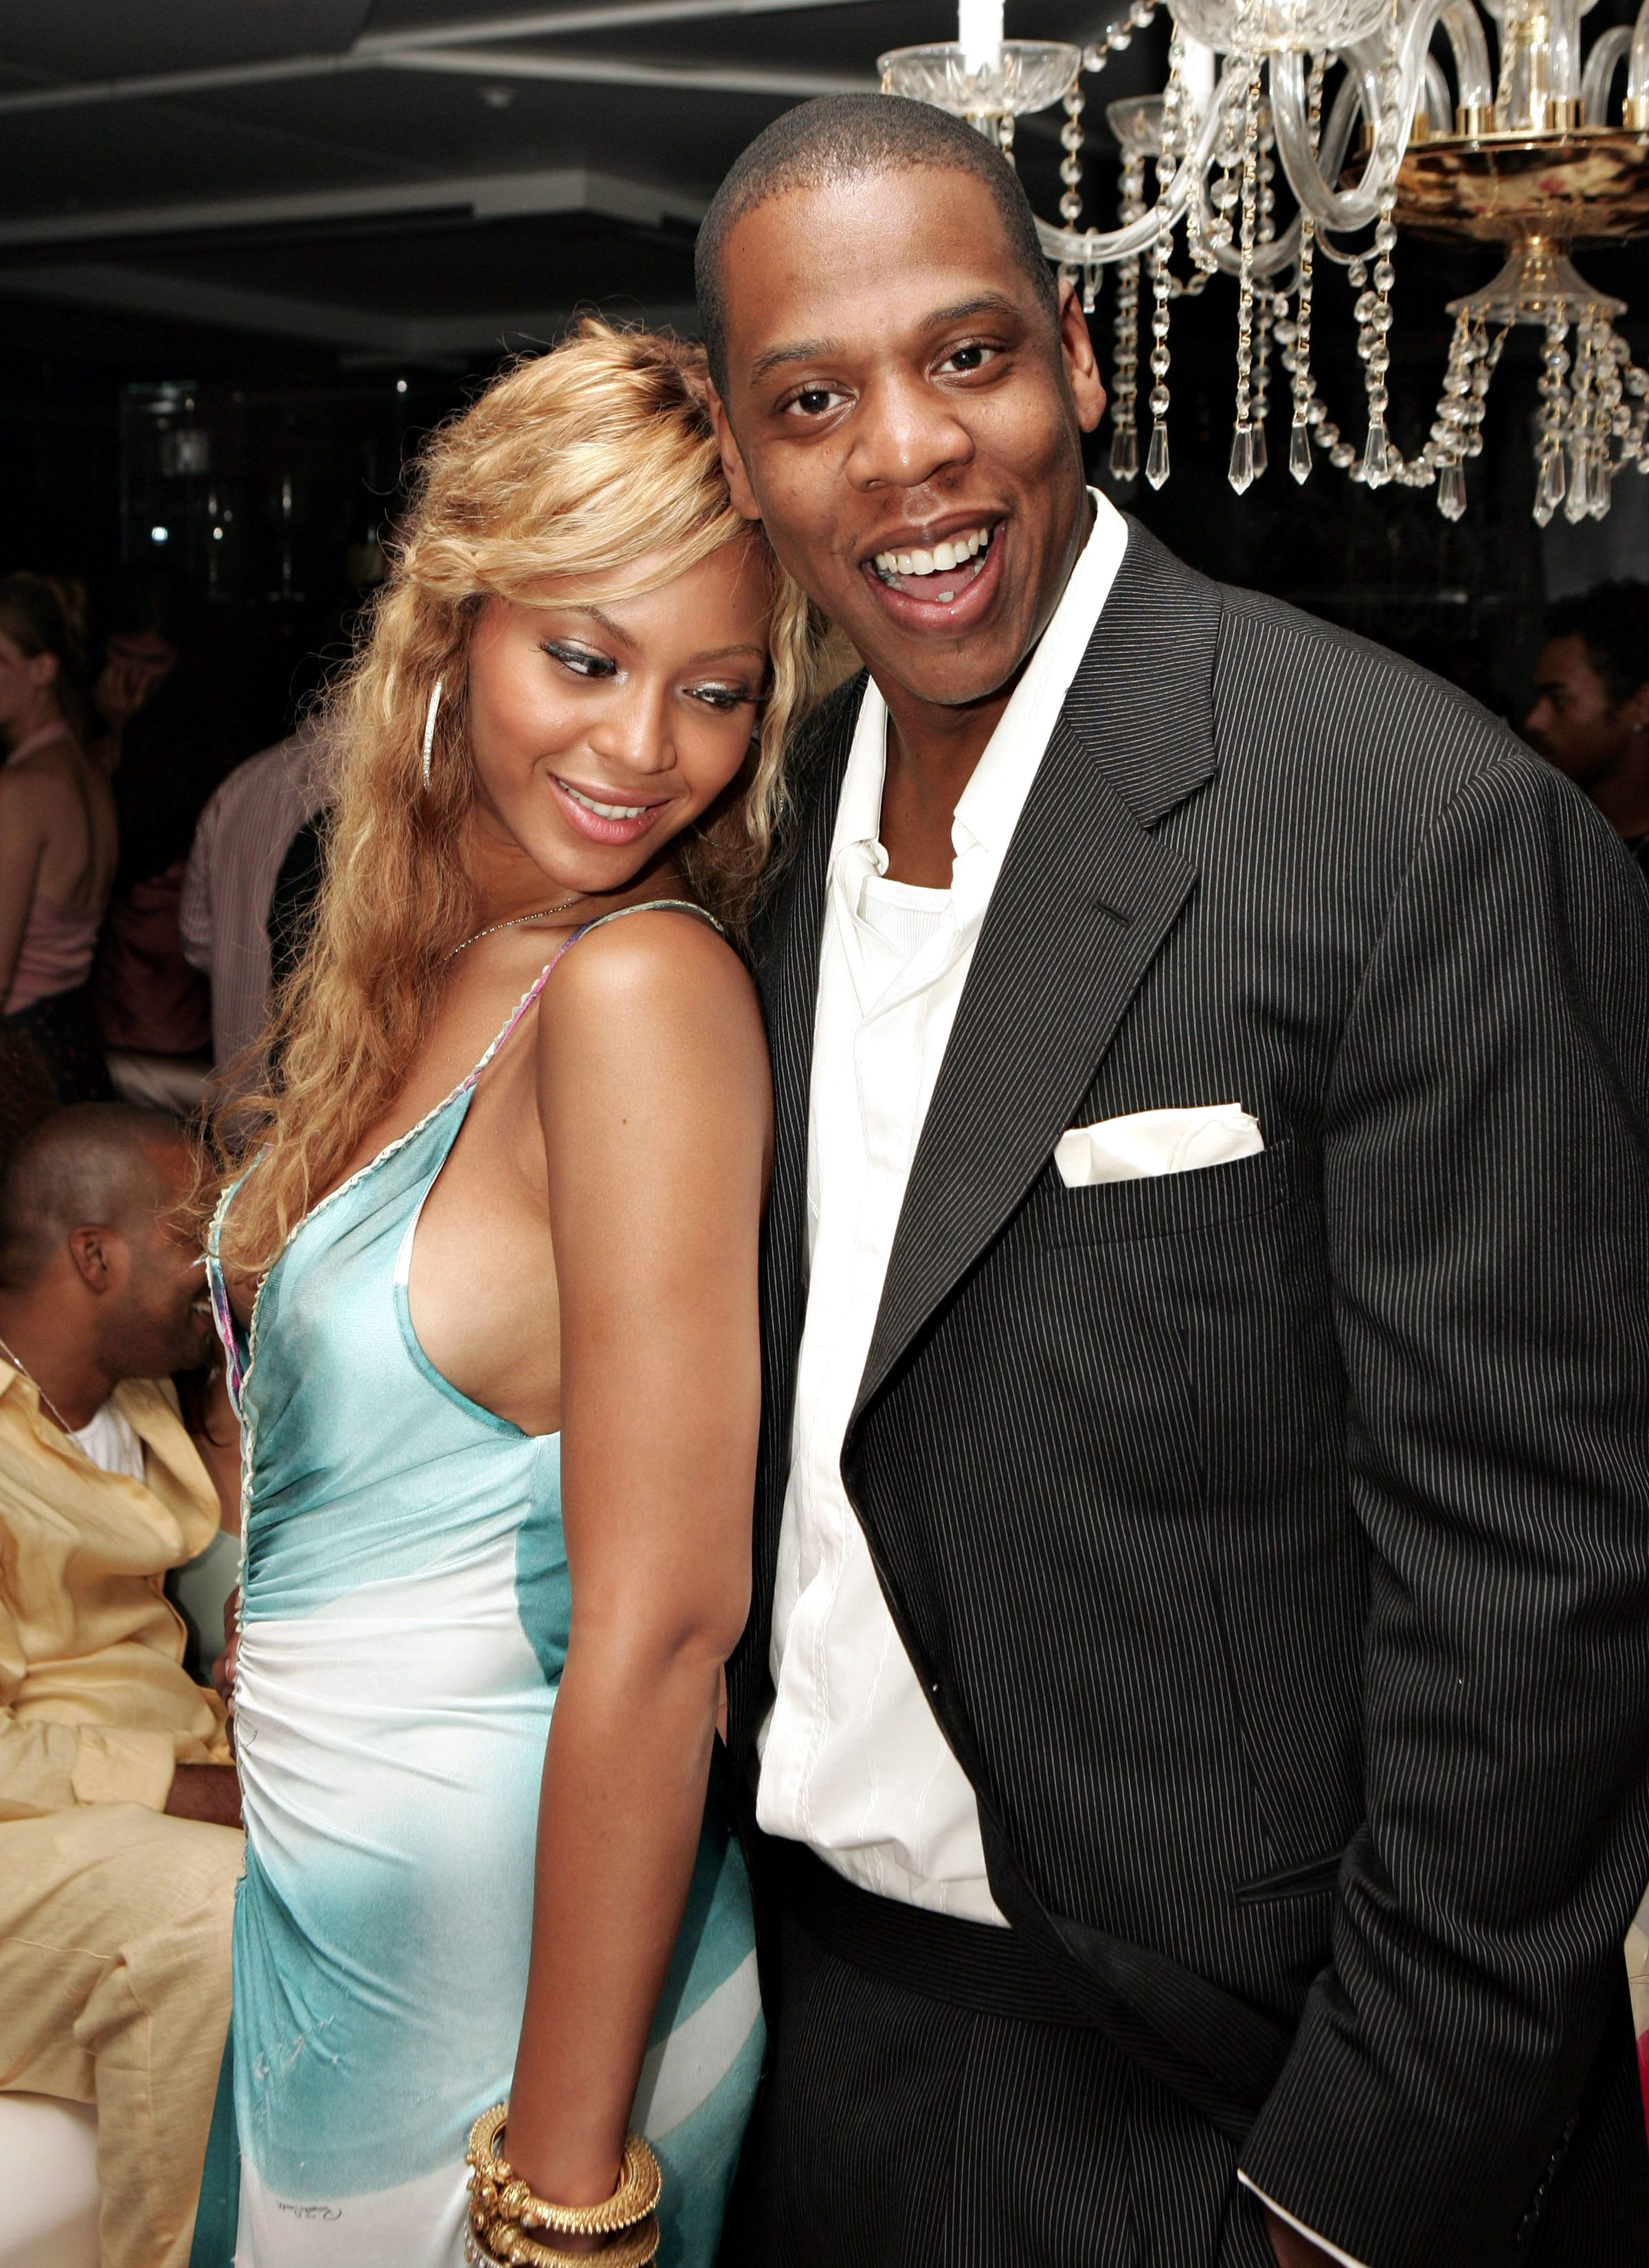 http://celebnmusic247.com/wp-content/uploads/2013/03/310-Jay-Z-Beyonce-and-More-Celebs-Financials-Exposed-1.jpg